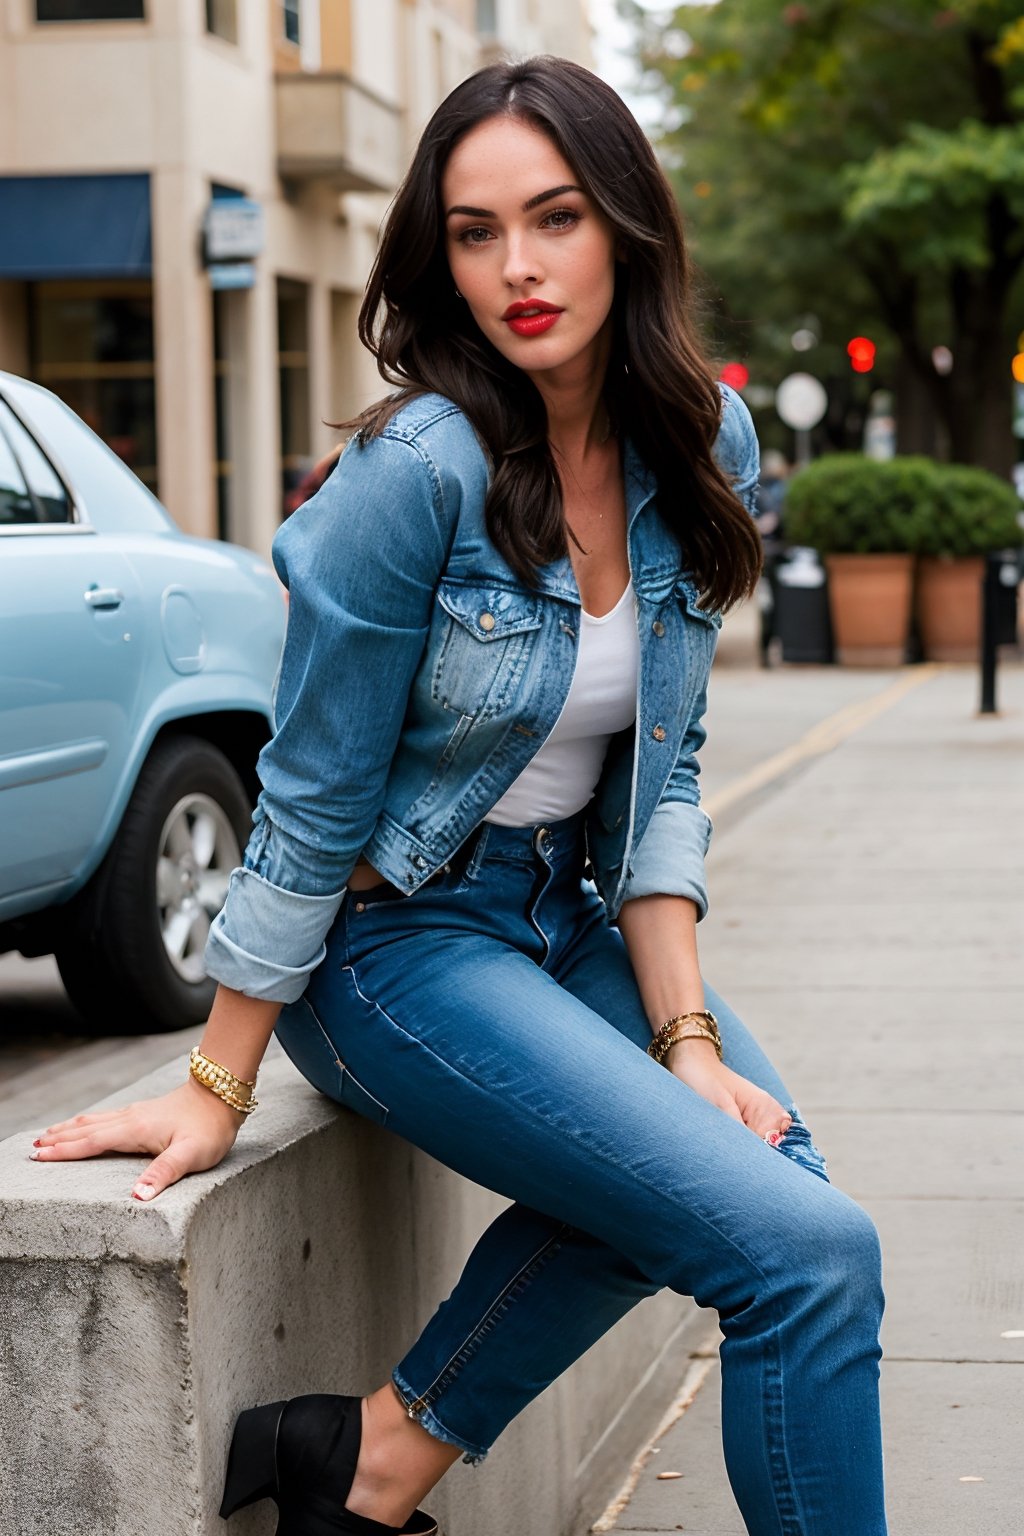 beautiful face, hot red lips, hot make-up, wearing cropped denim jacket and tight levis jeans in light blue color,blackbootsnjeans,Sexy Pose,Megan fox 